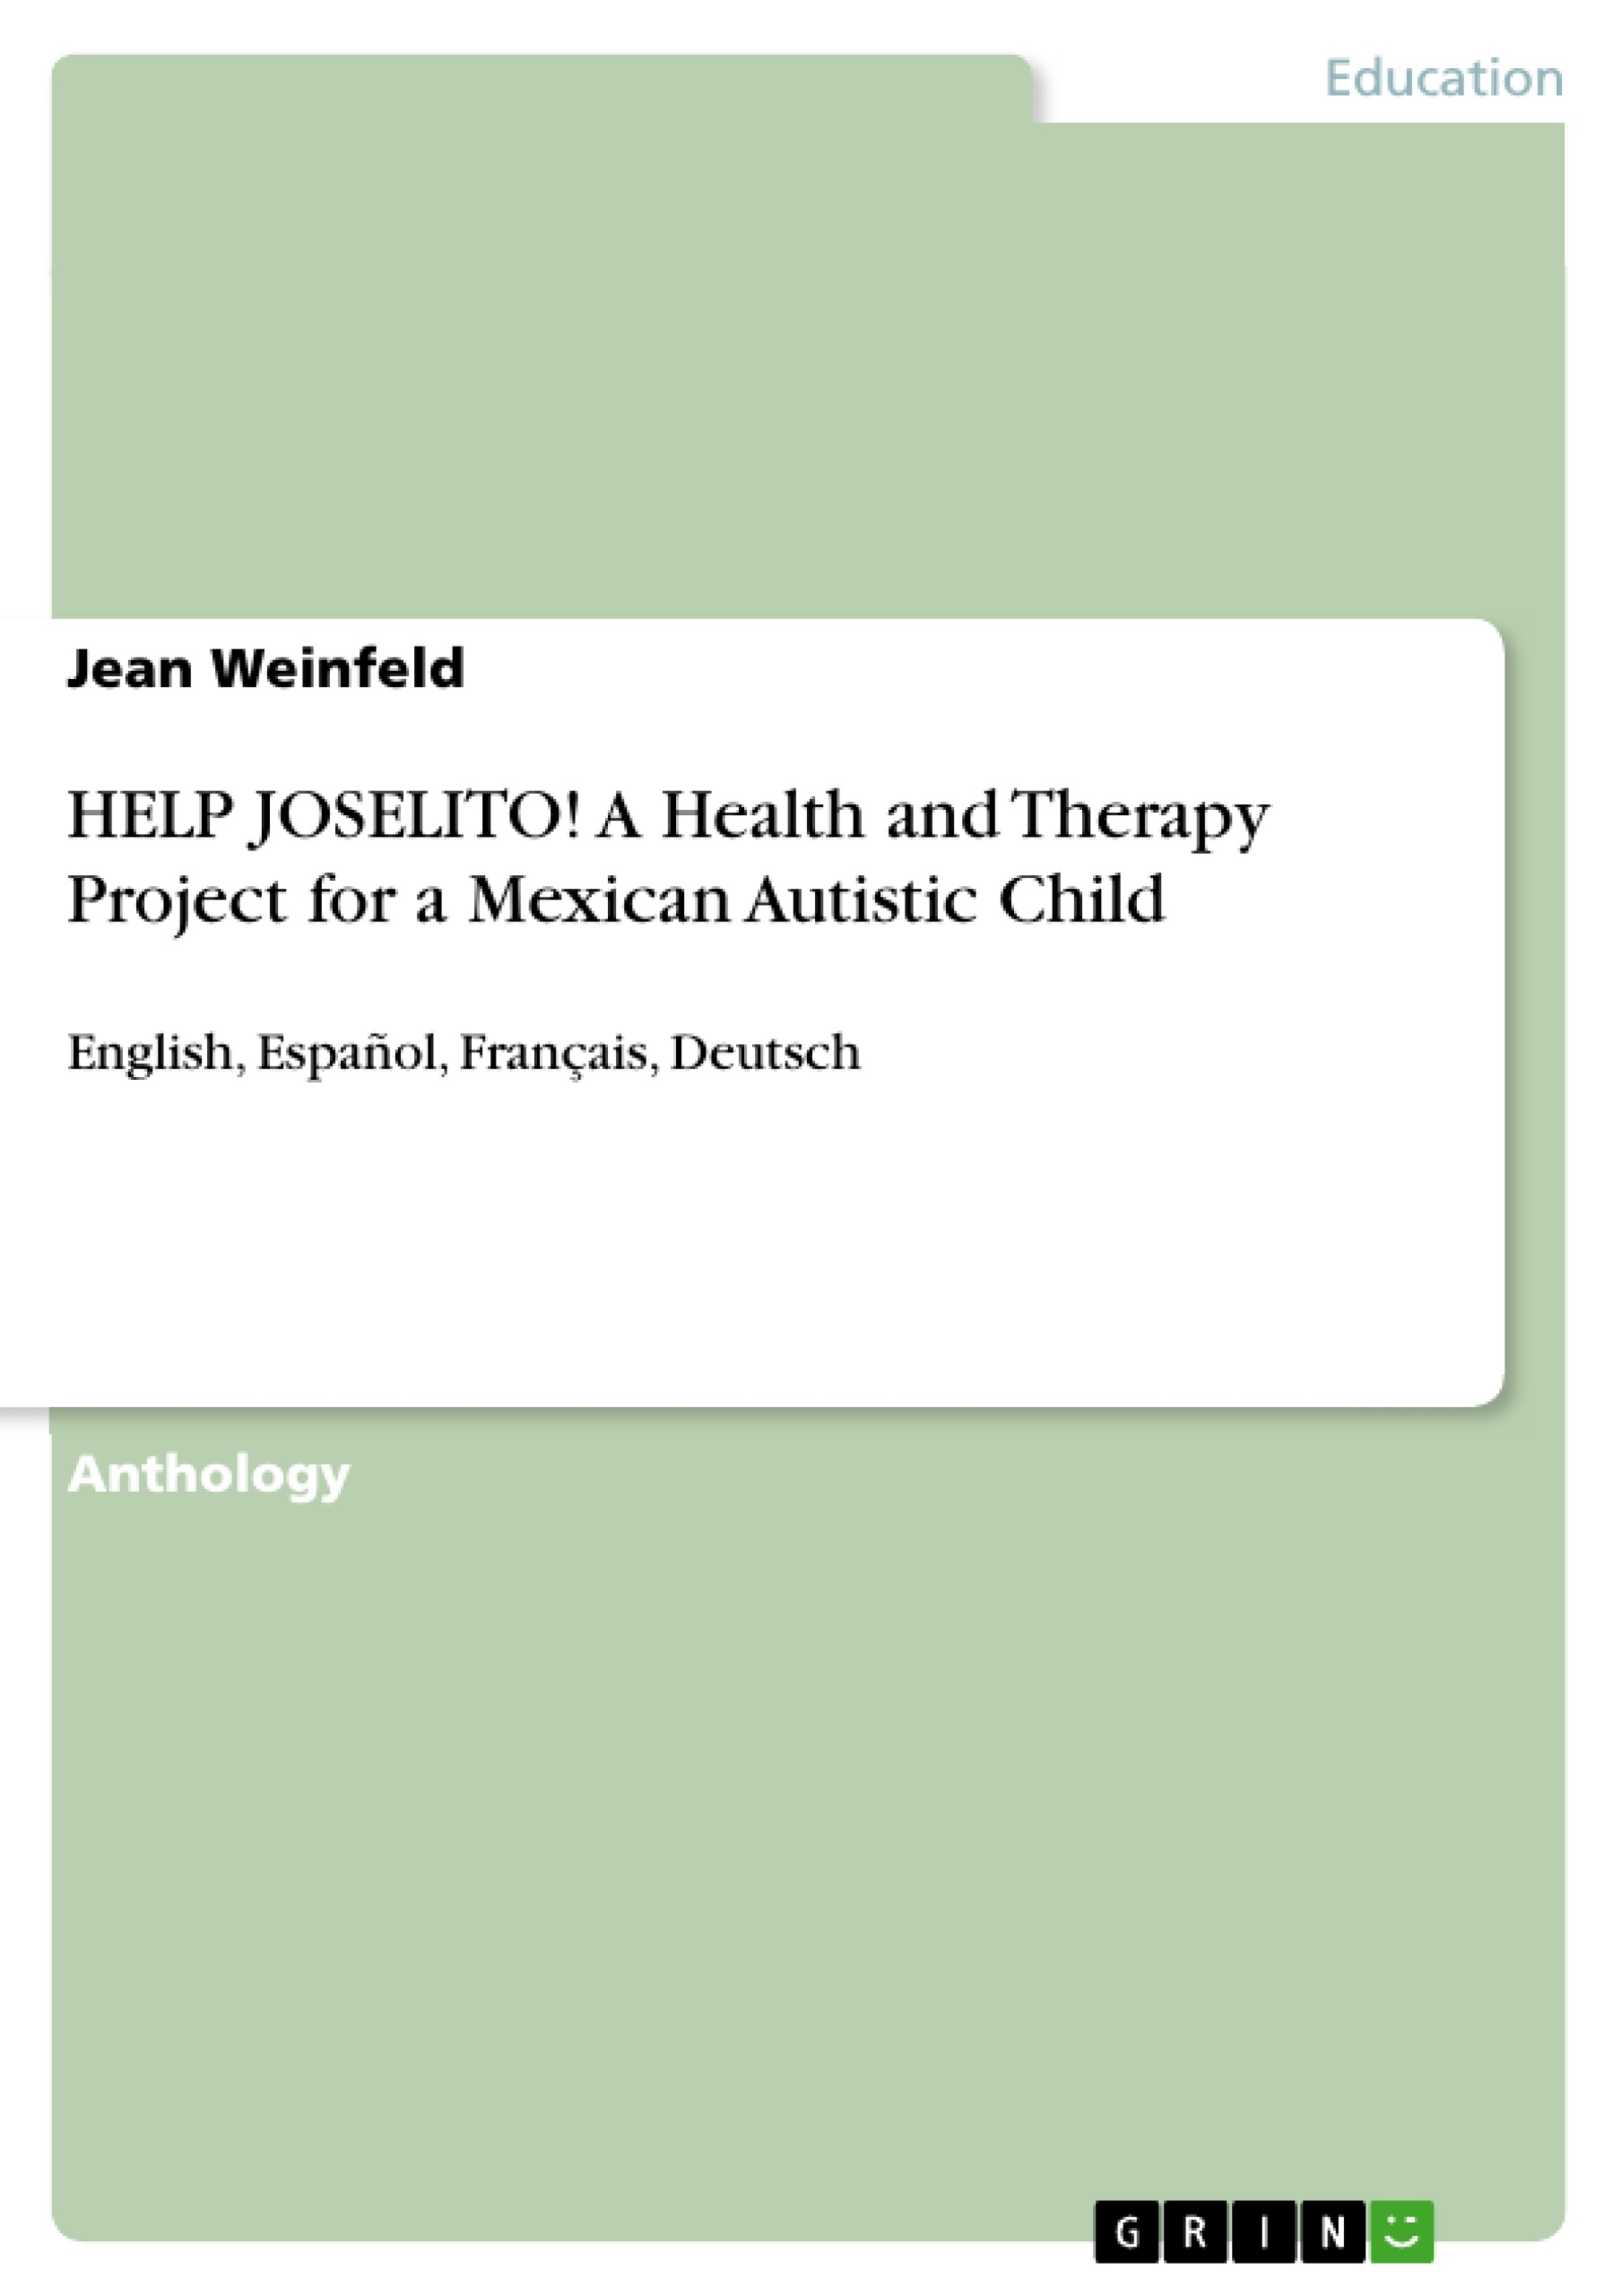 Titre: HELP JOSELITO! A Health and Therapy Project for a Mexican Autistic Child